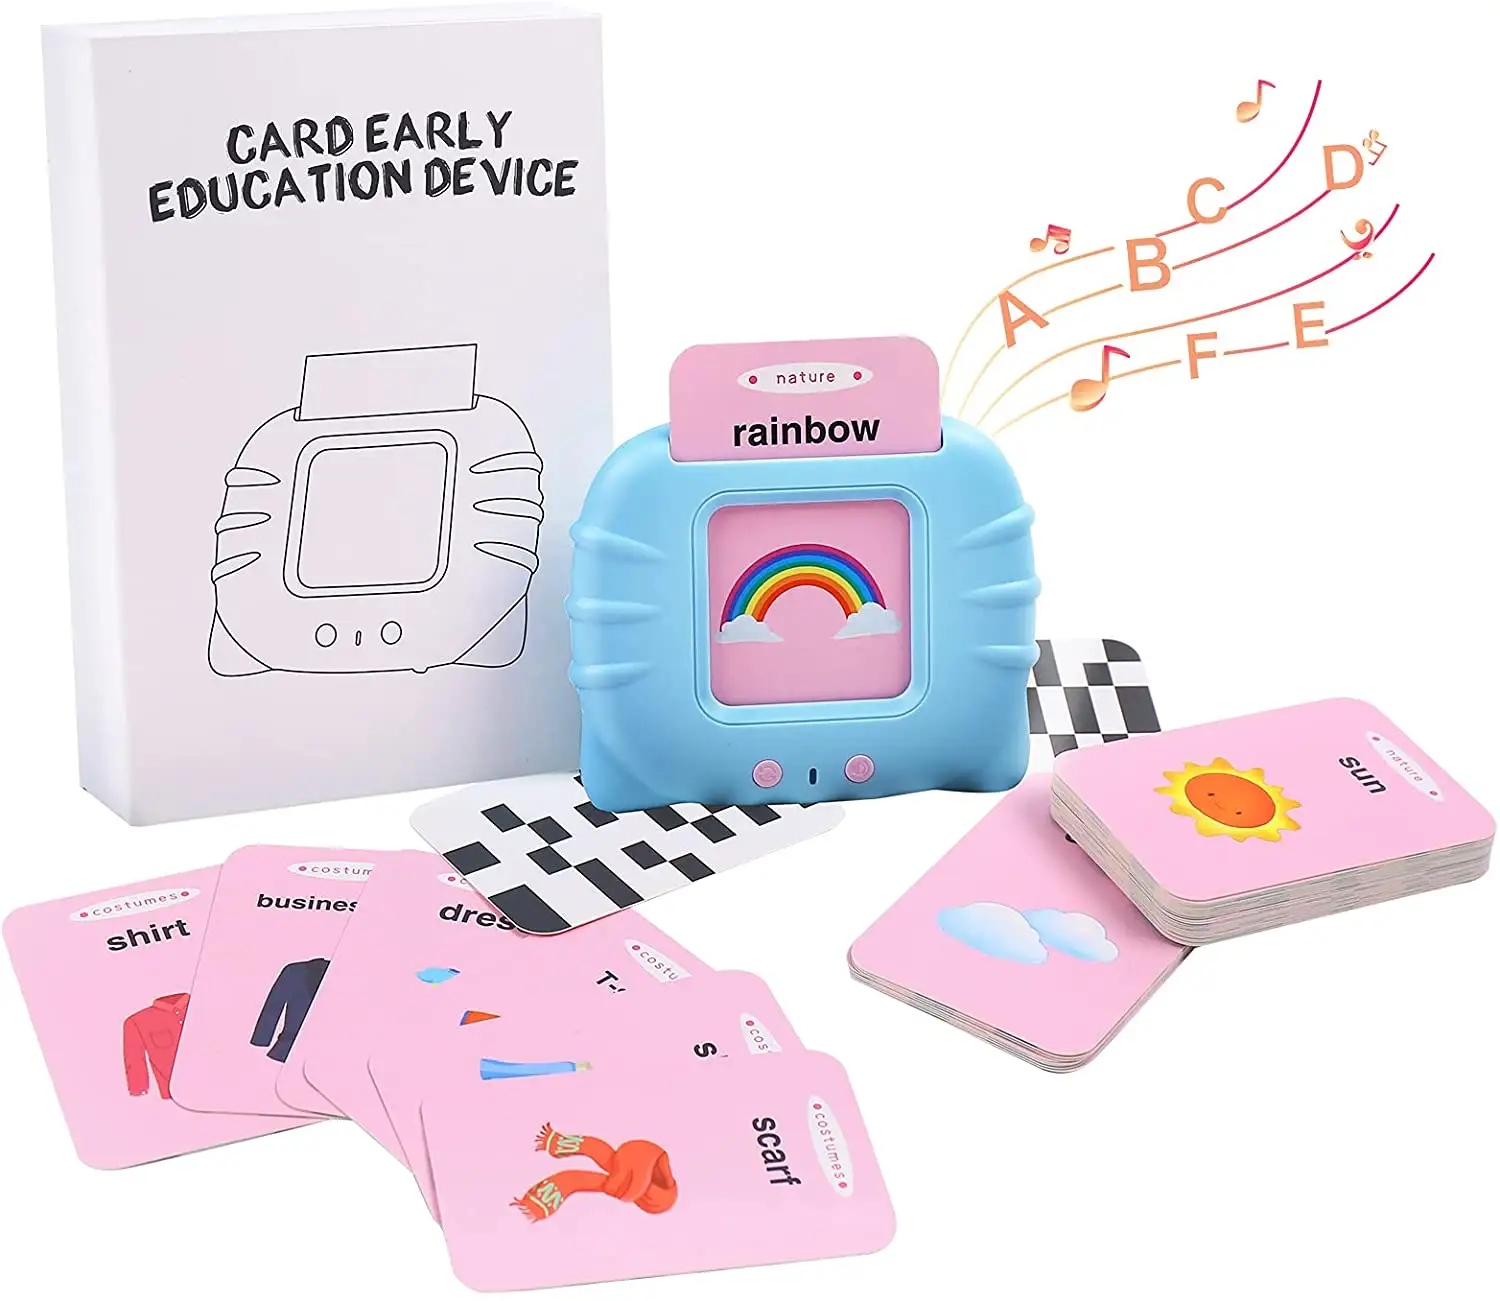 Kid children education learning talking phonics flash cards/cognitive cards machine for kids fun learning toys educational